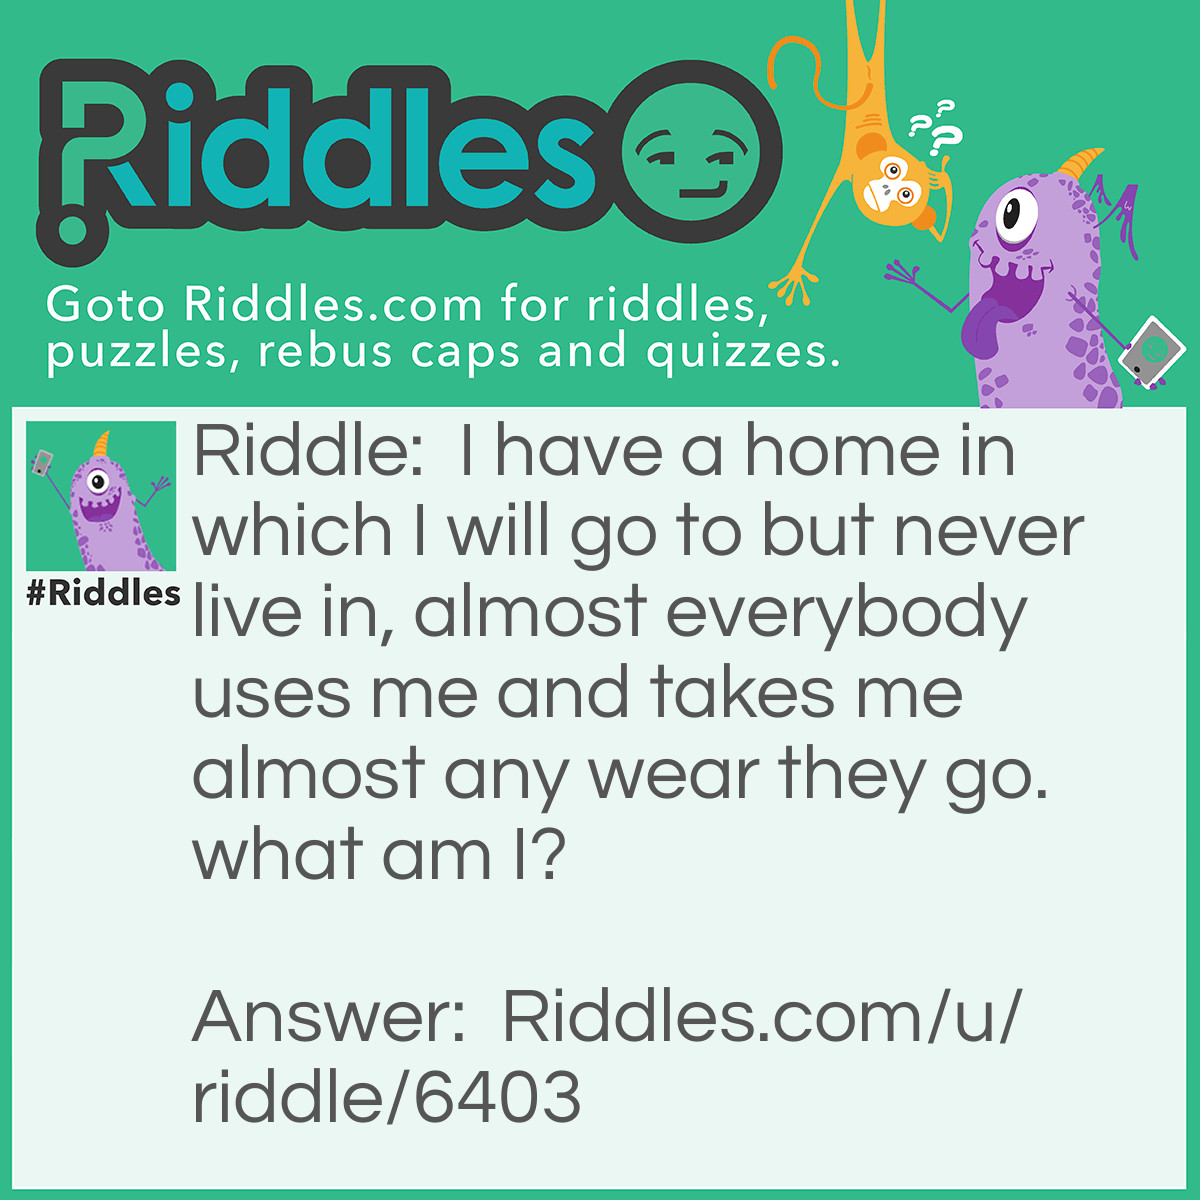 Riddle: I have a home in which I will go to but never live in, almost everybody uses me and takes me almost any wear they go. what am I? Answer: Phone.